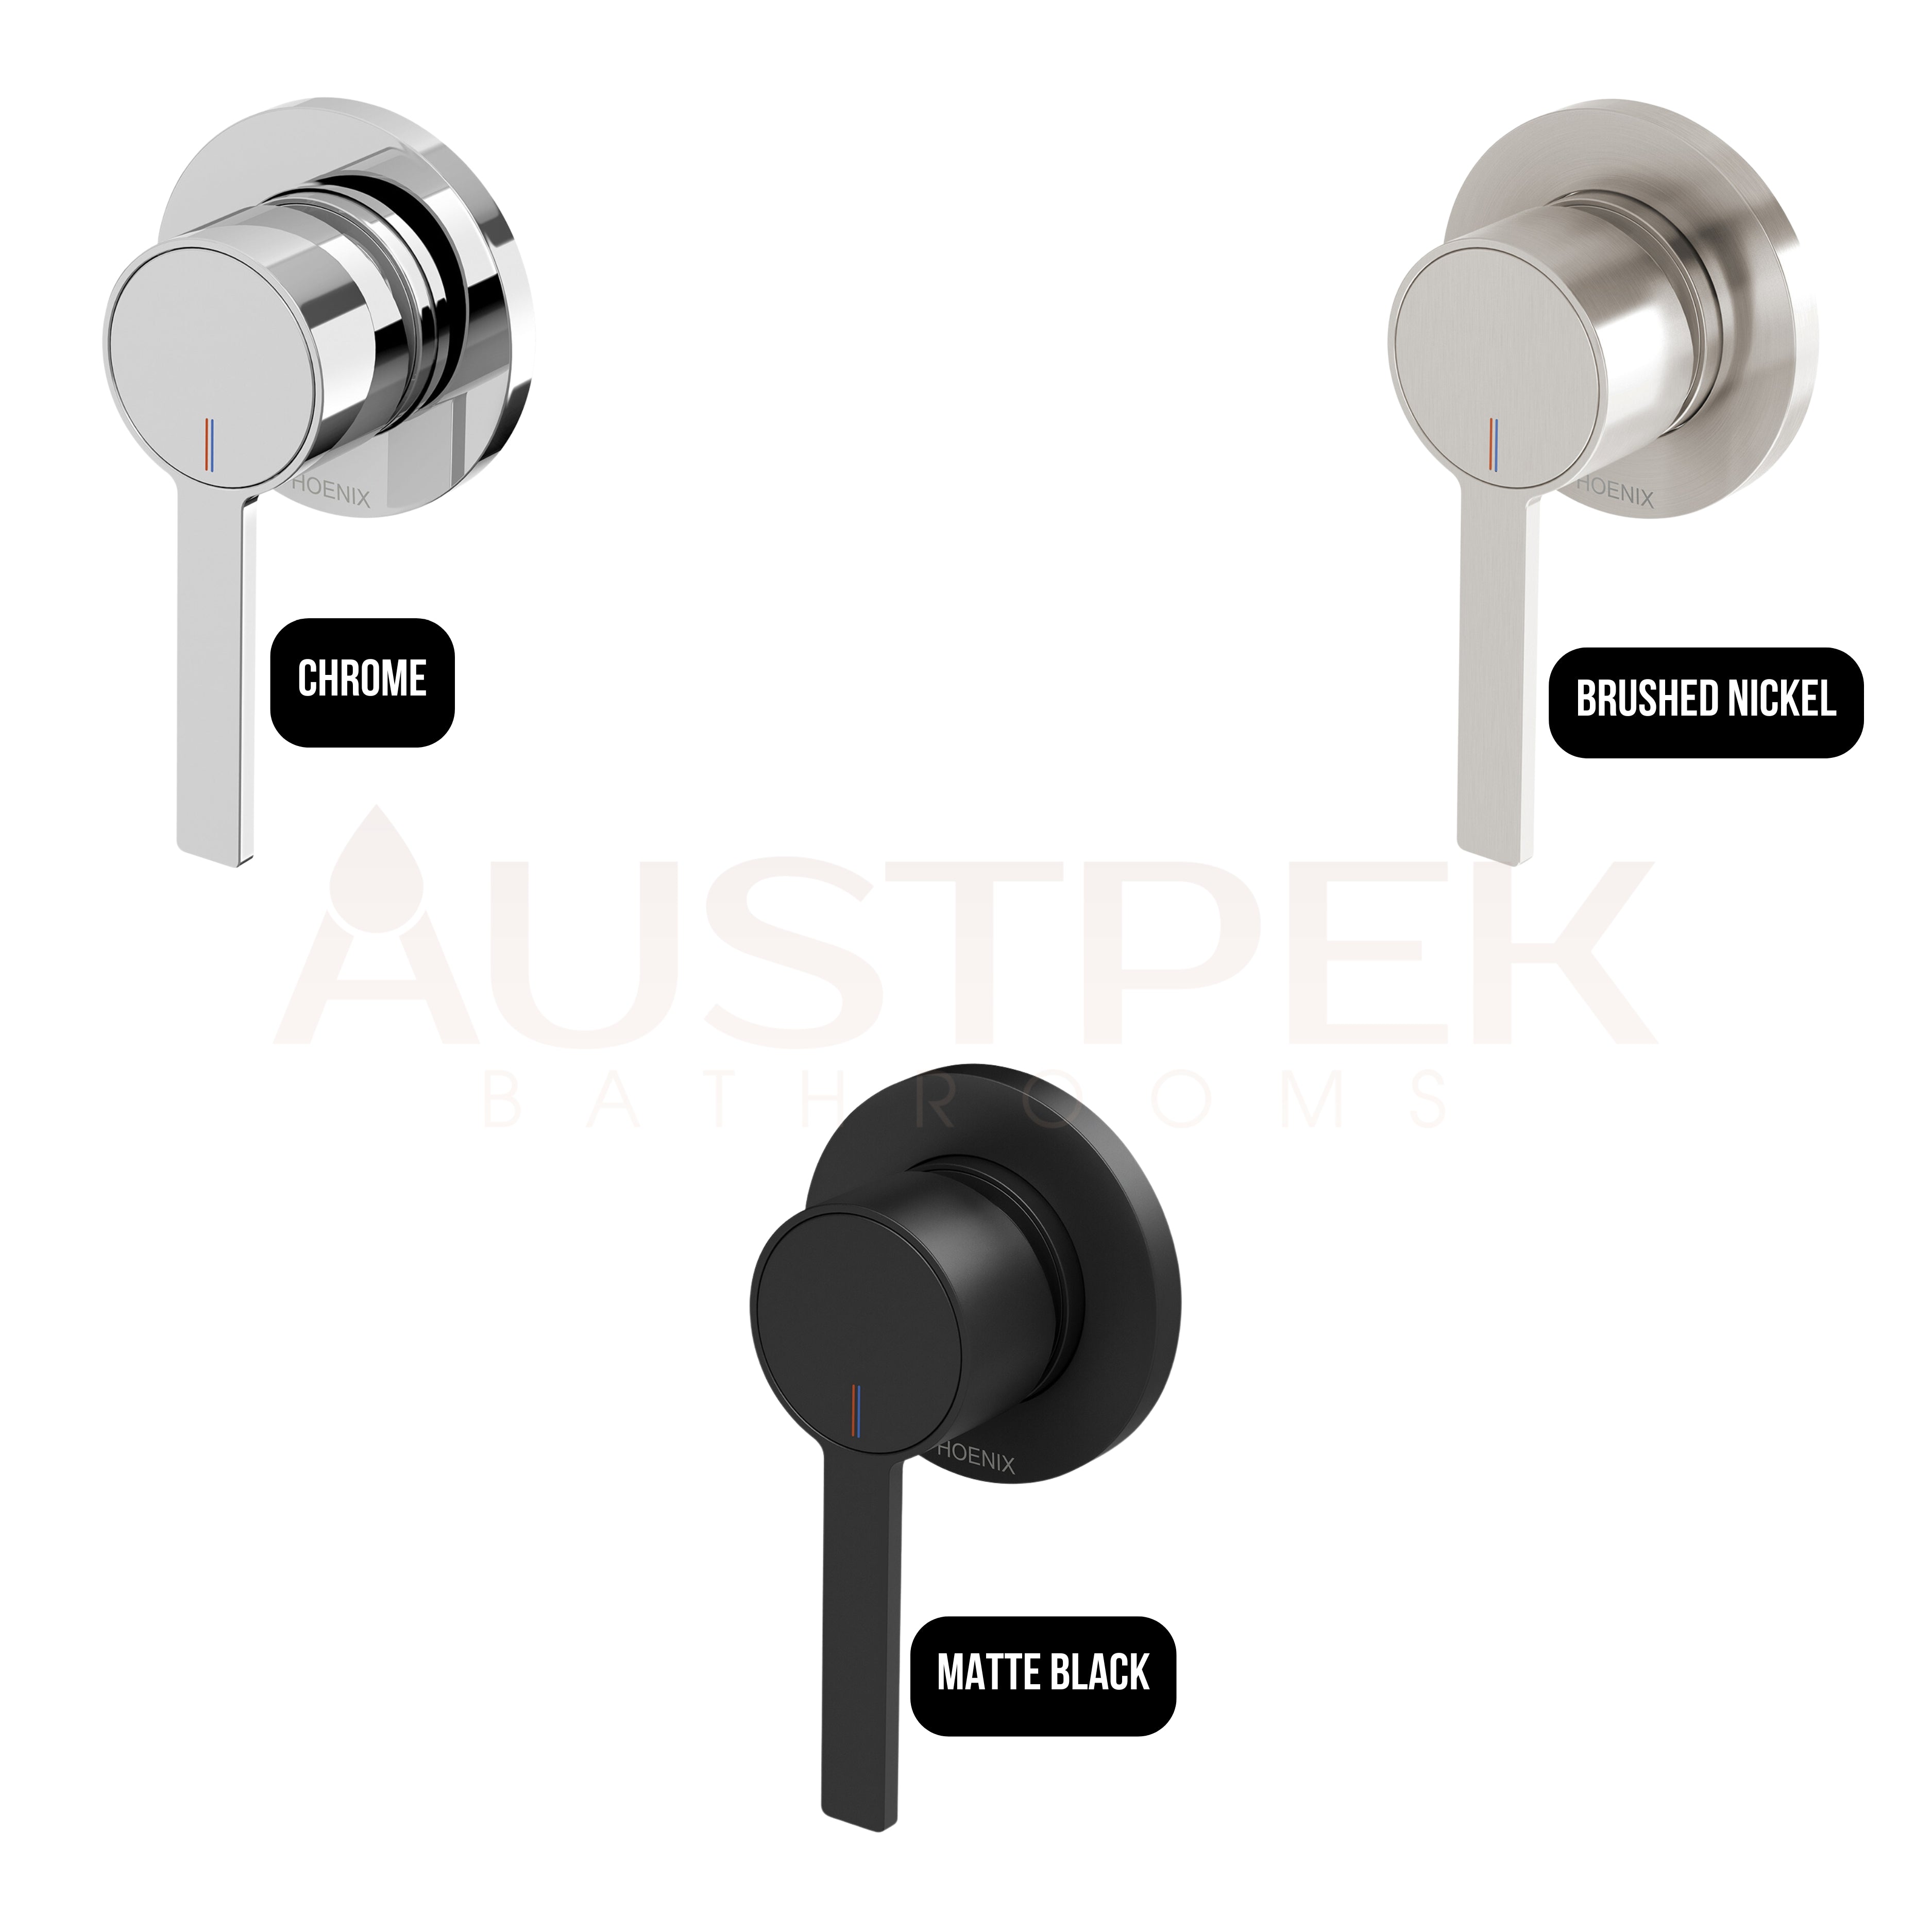 PHOENIX LEXI MKII SWITCHMIX SHOWER / WALL MIXER FIT-OFF AND ROUGH-IN KIT MATTE BLACK